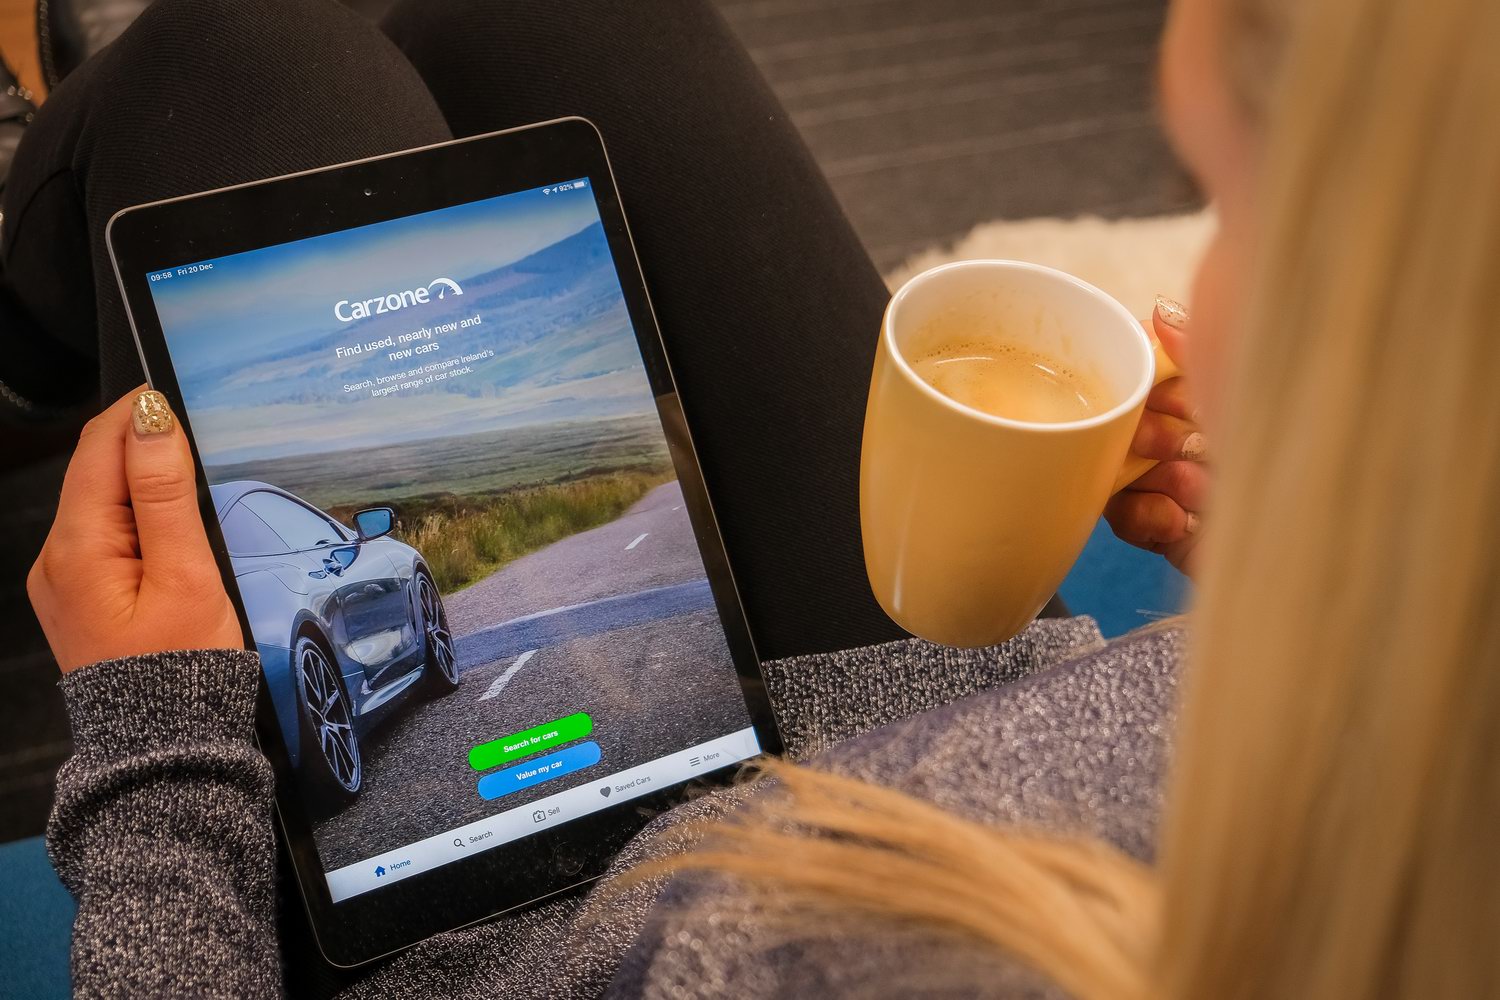 Car Industry News | Carzone to offer free advertising packages for dealers | CompleteCar.ie